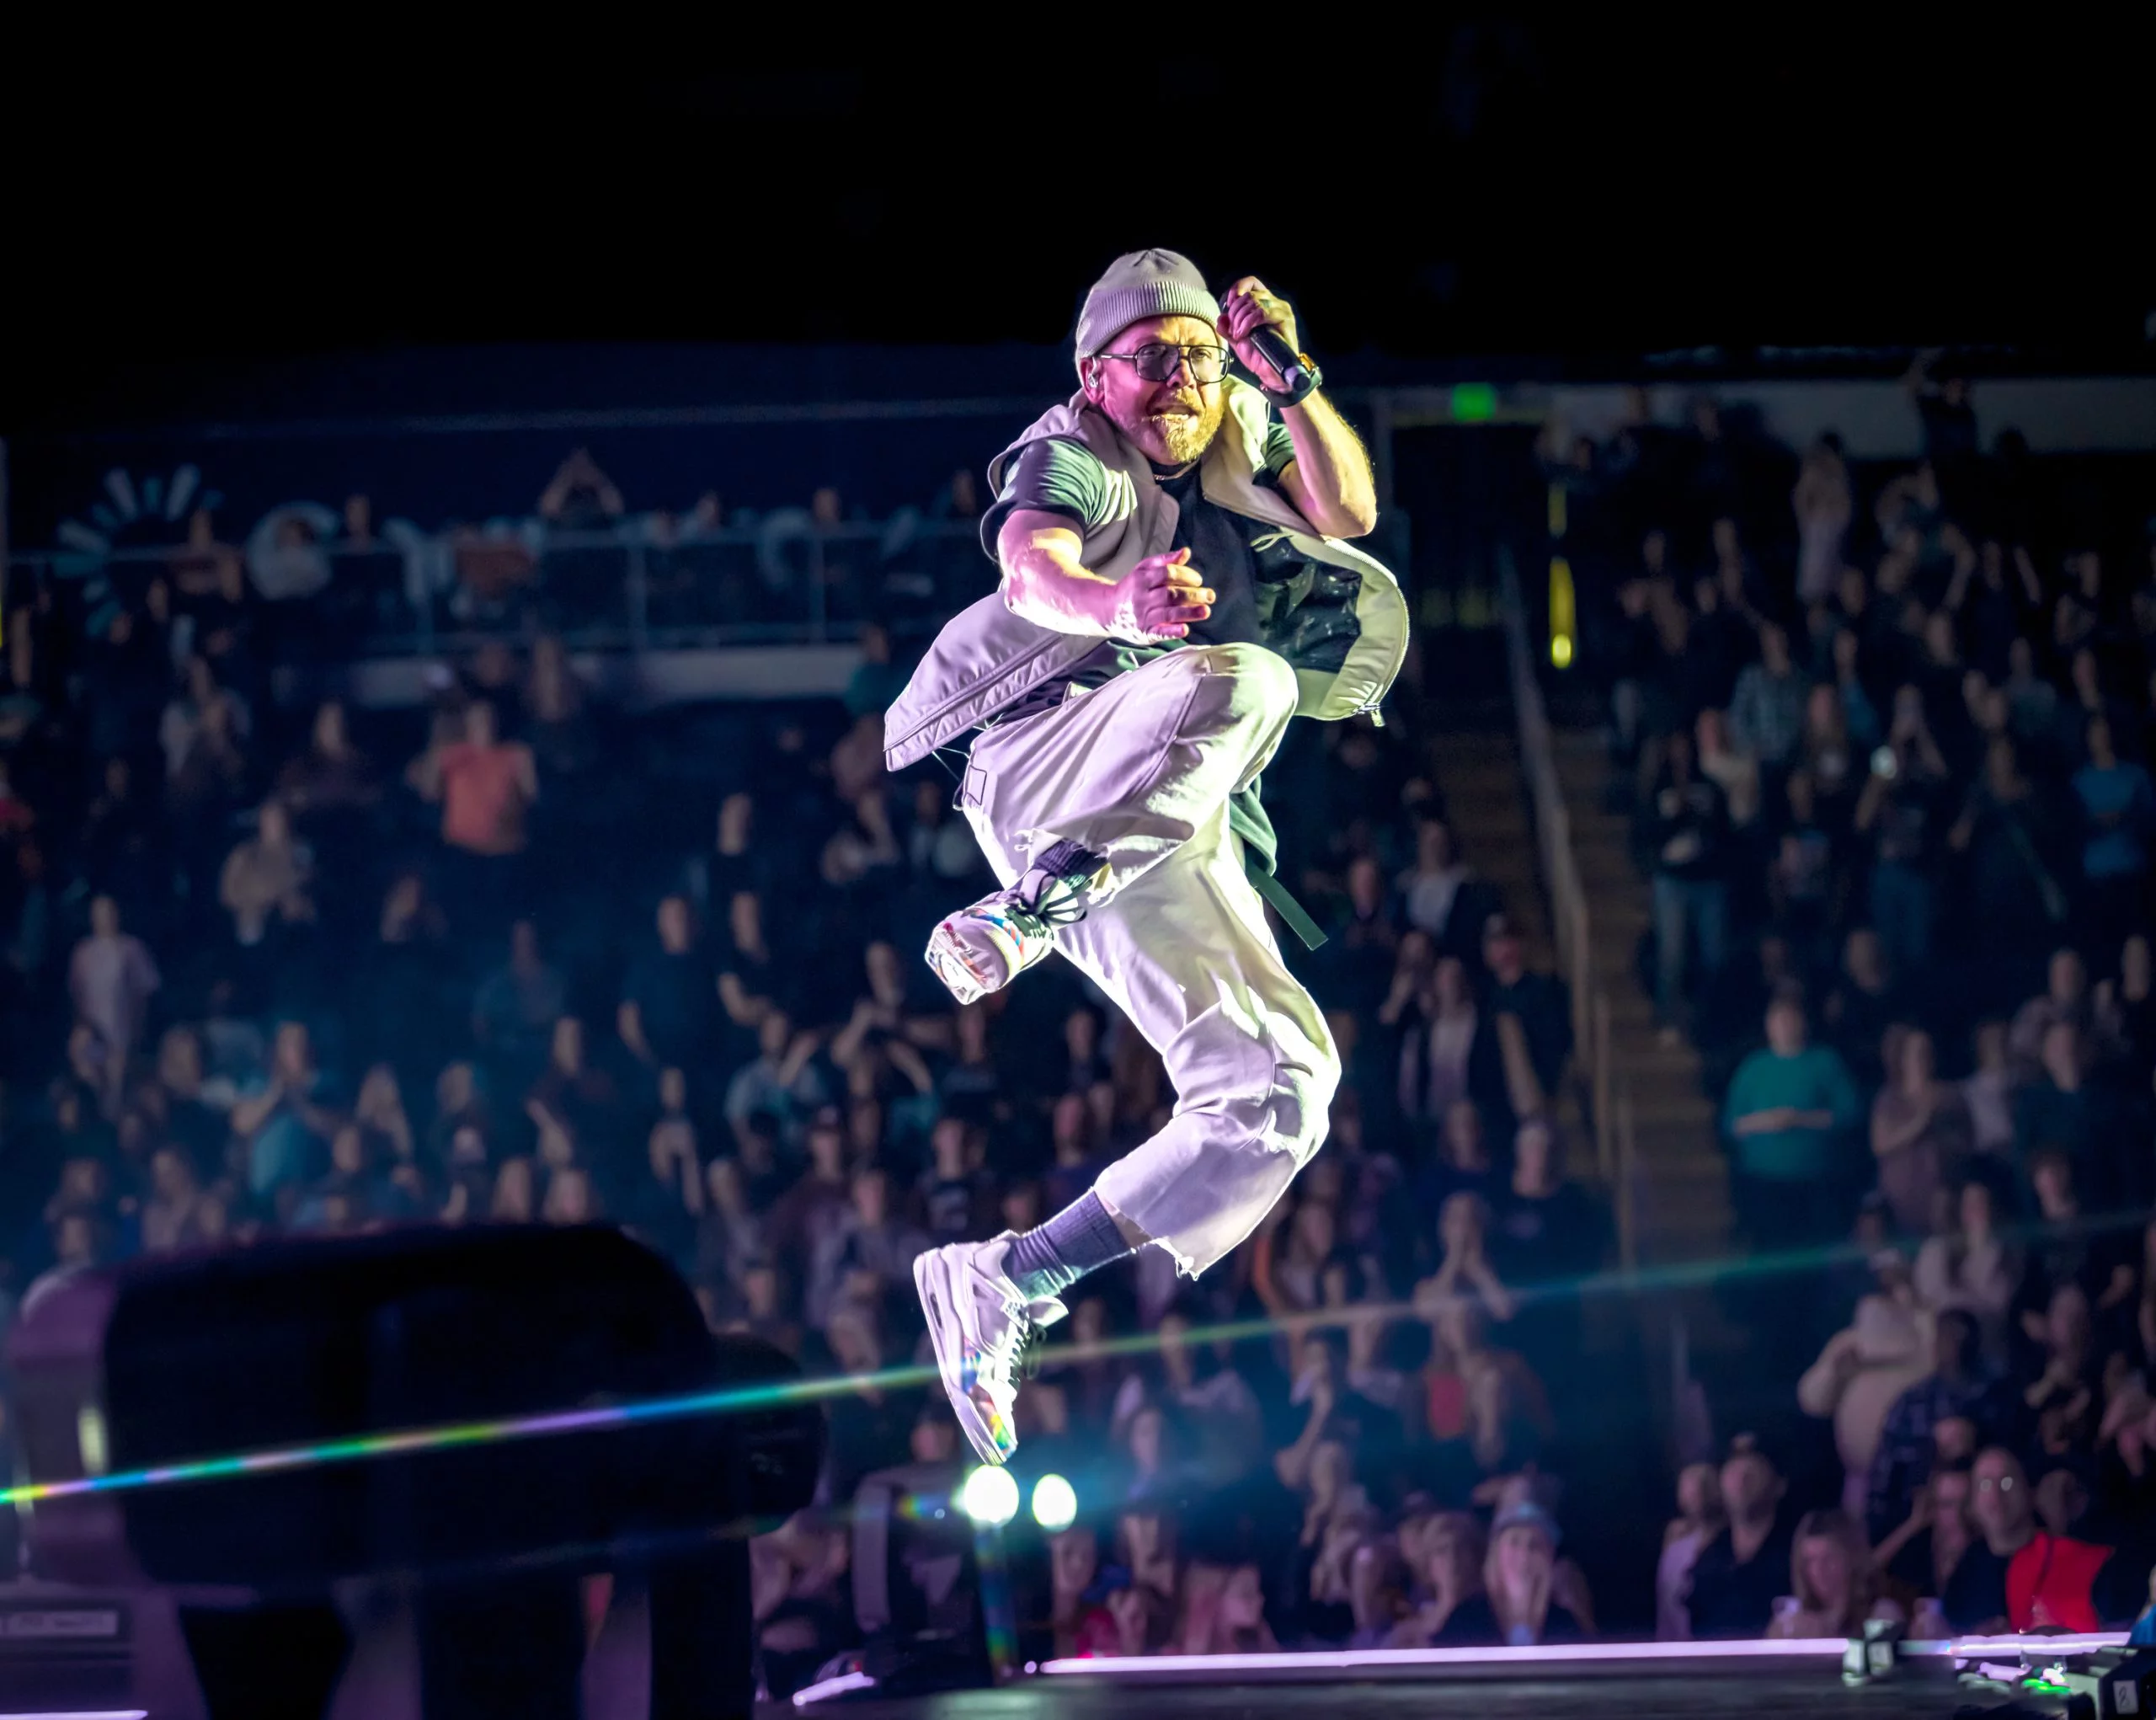 TobyMac talks Hits Deep tour, new music and God as the path to